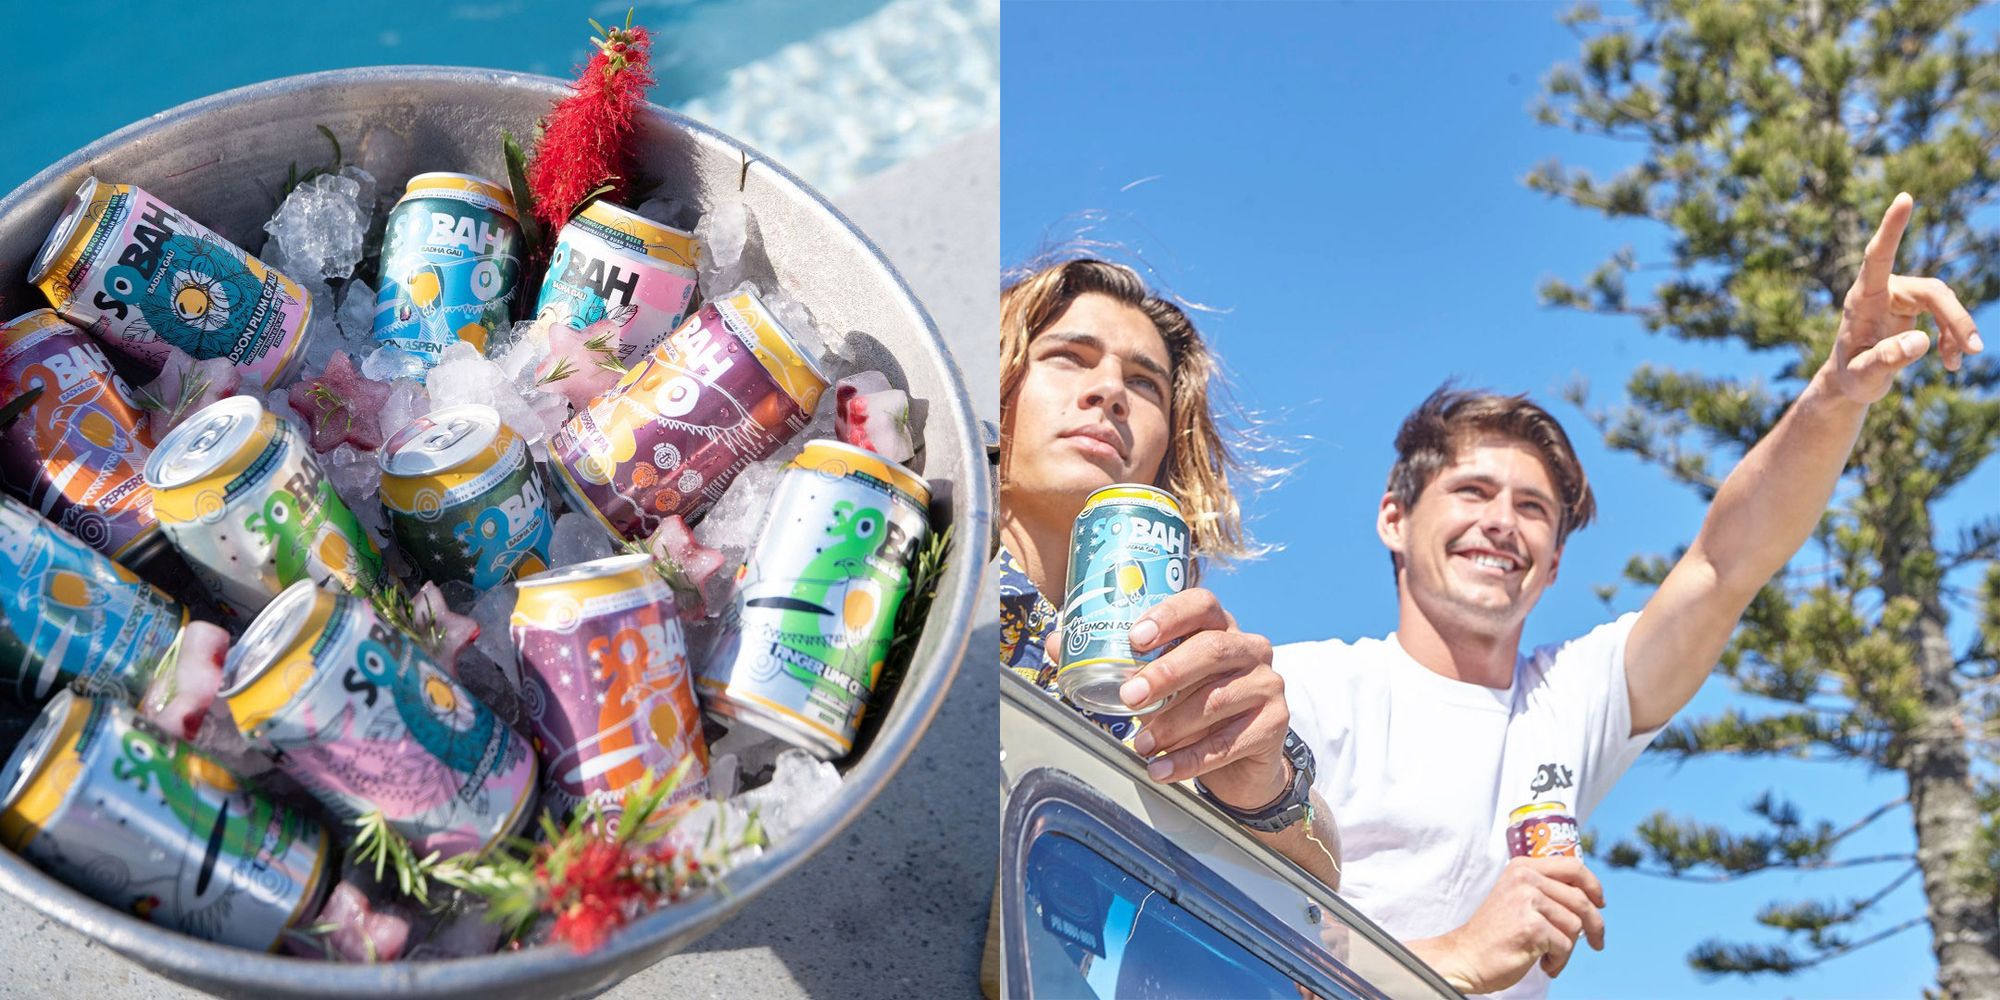 Left image is a bucket of Sobah drinks, right image is two people drinking with one pointing into the distance. 